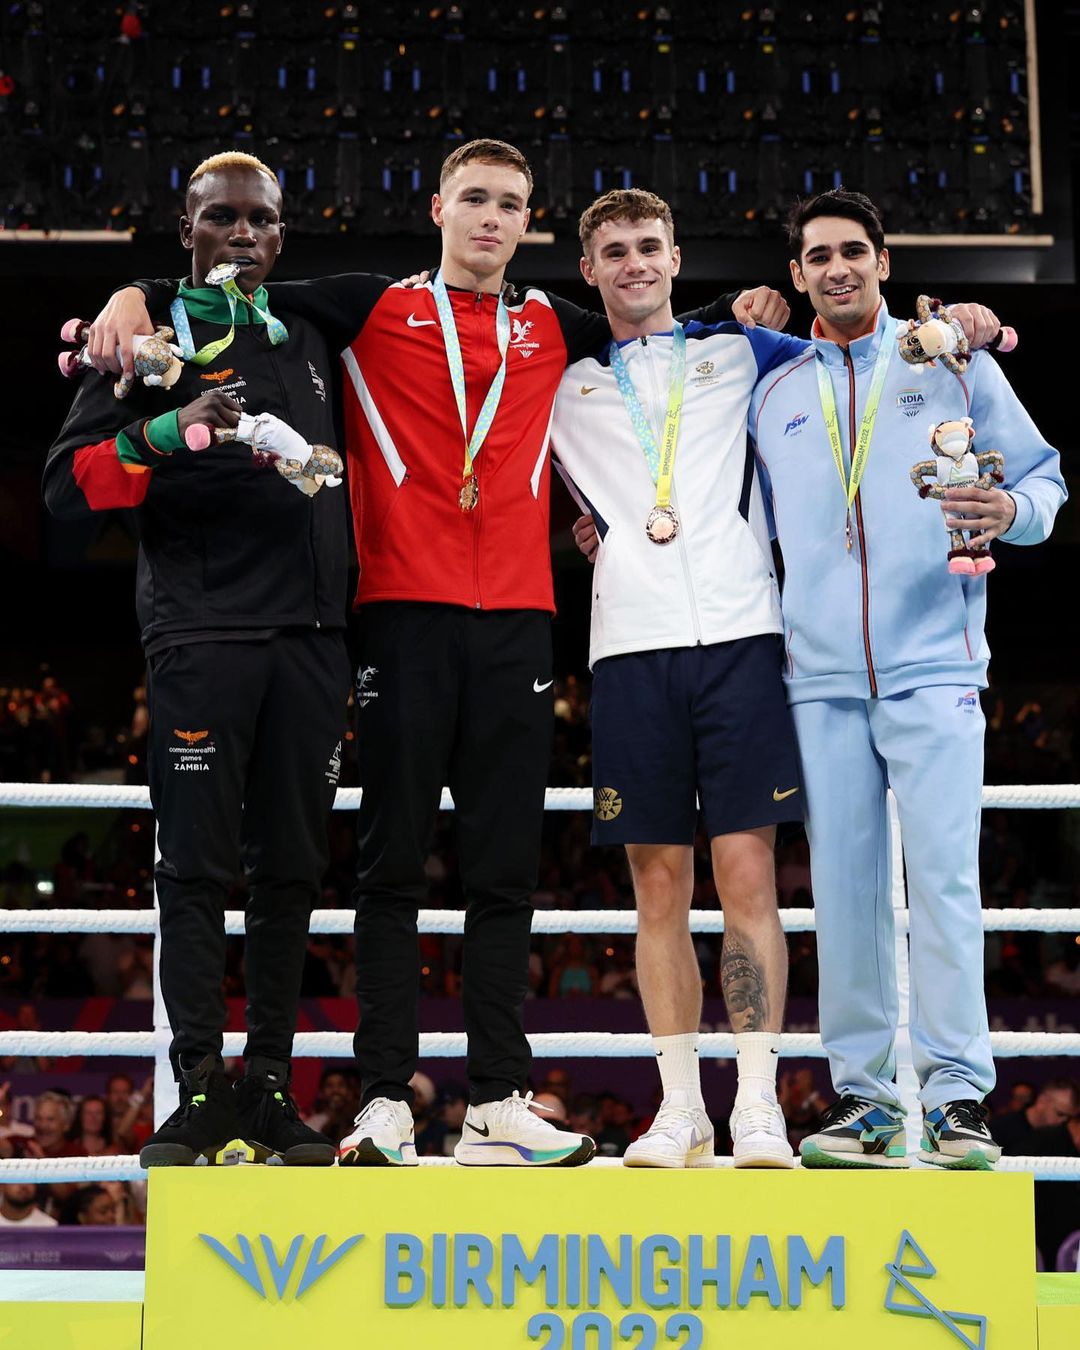 Rohit Tokas, the boxer, won a medal at the Commonwealth Games for India despite severe injuries